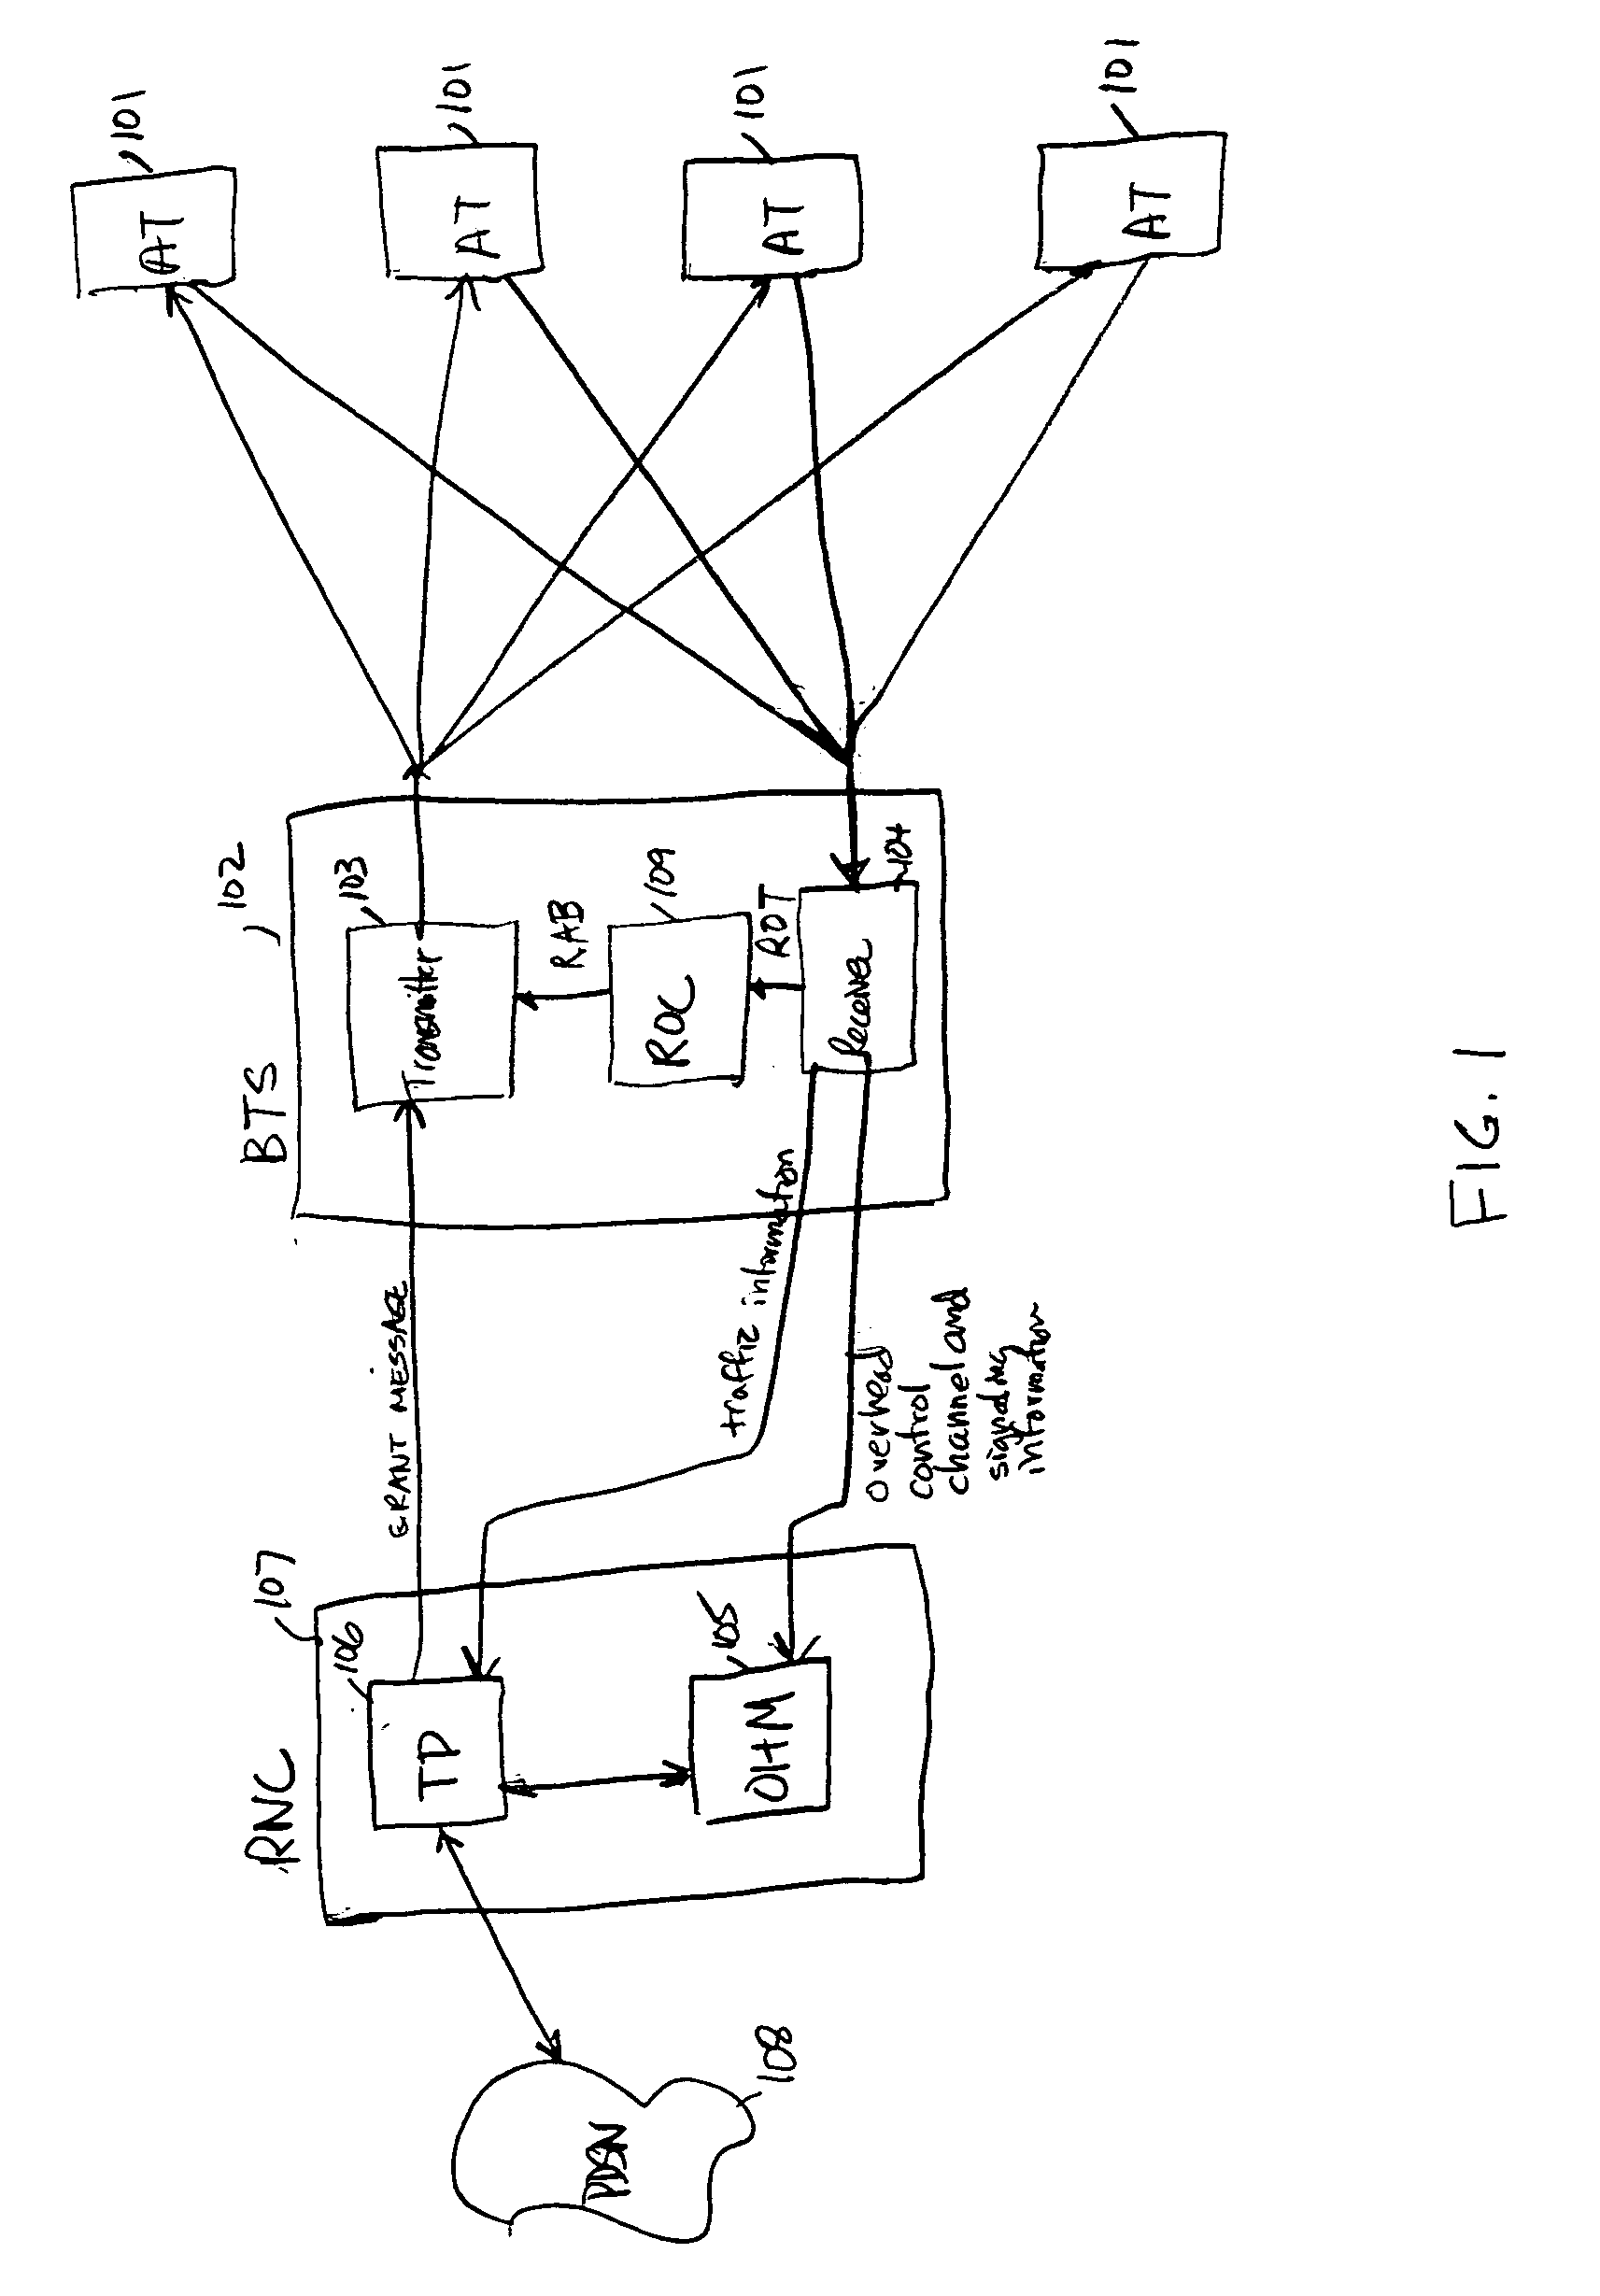 Method for reverse link congestion overload control in wireless high speed data applications